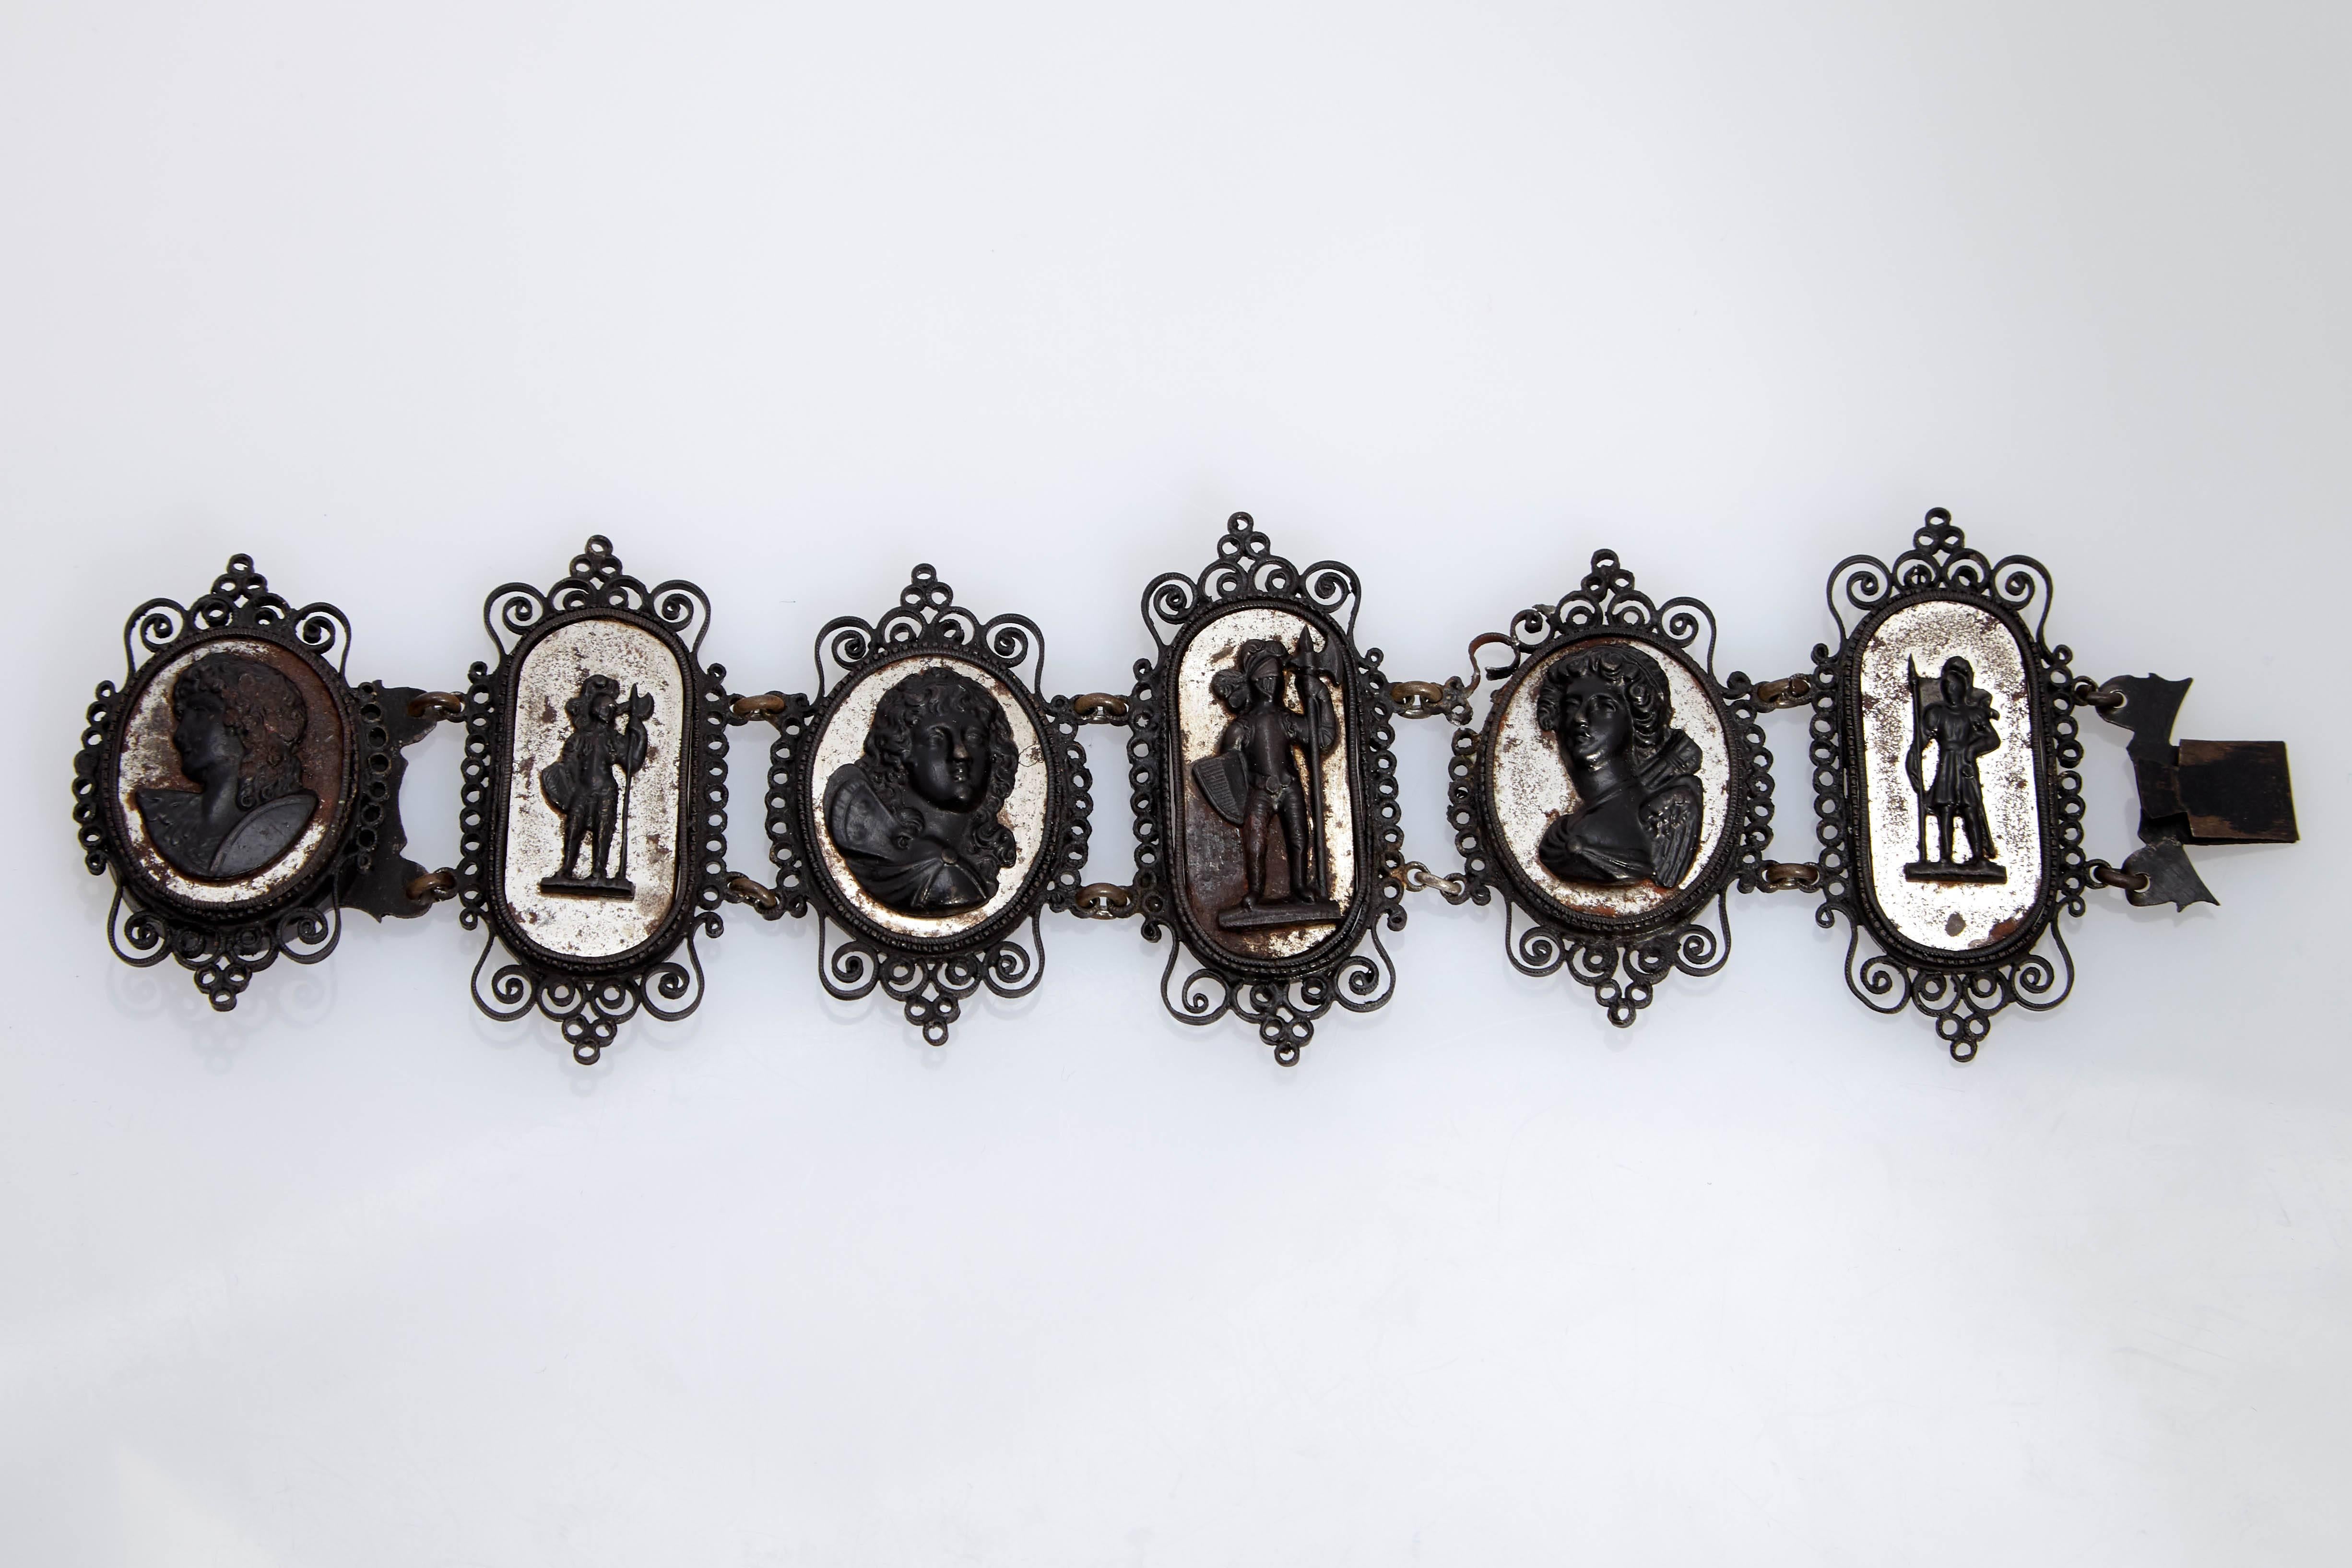 Berlin iron bracelet of six joined cameos surrounded by openwork motifs (black lacquered cast iron).  Berlin, circa 1800s.